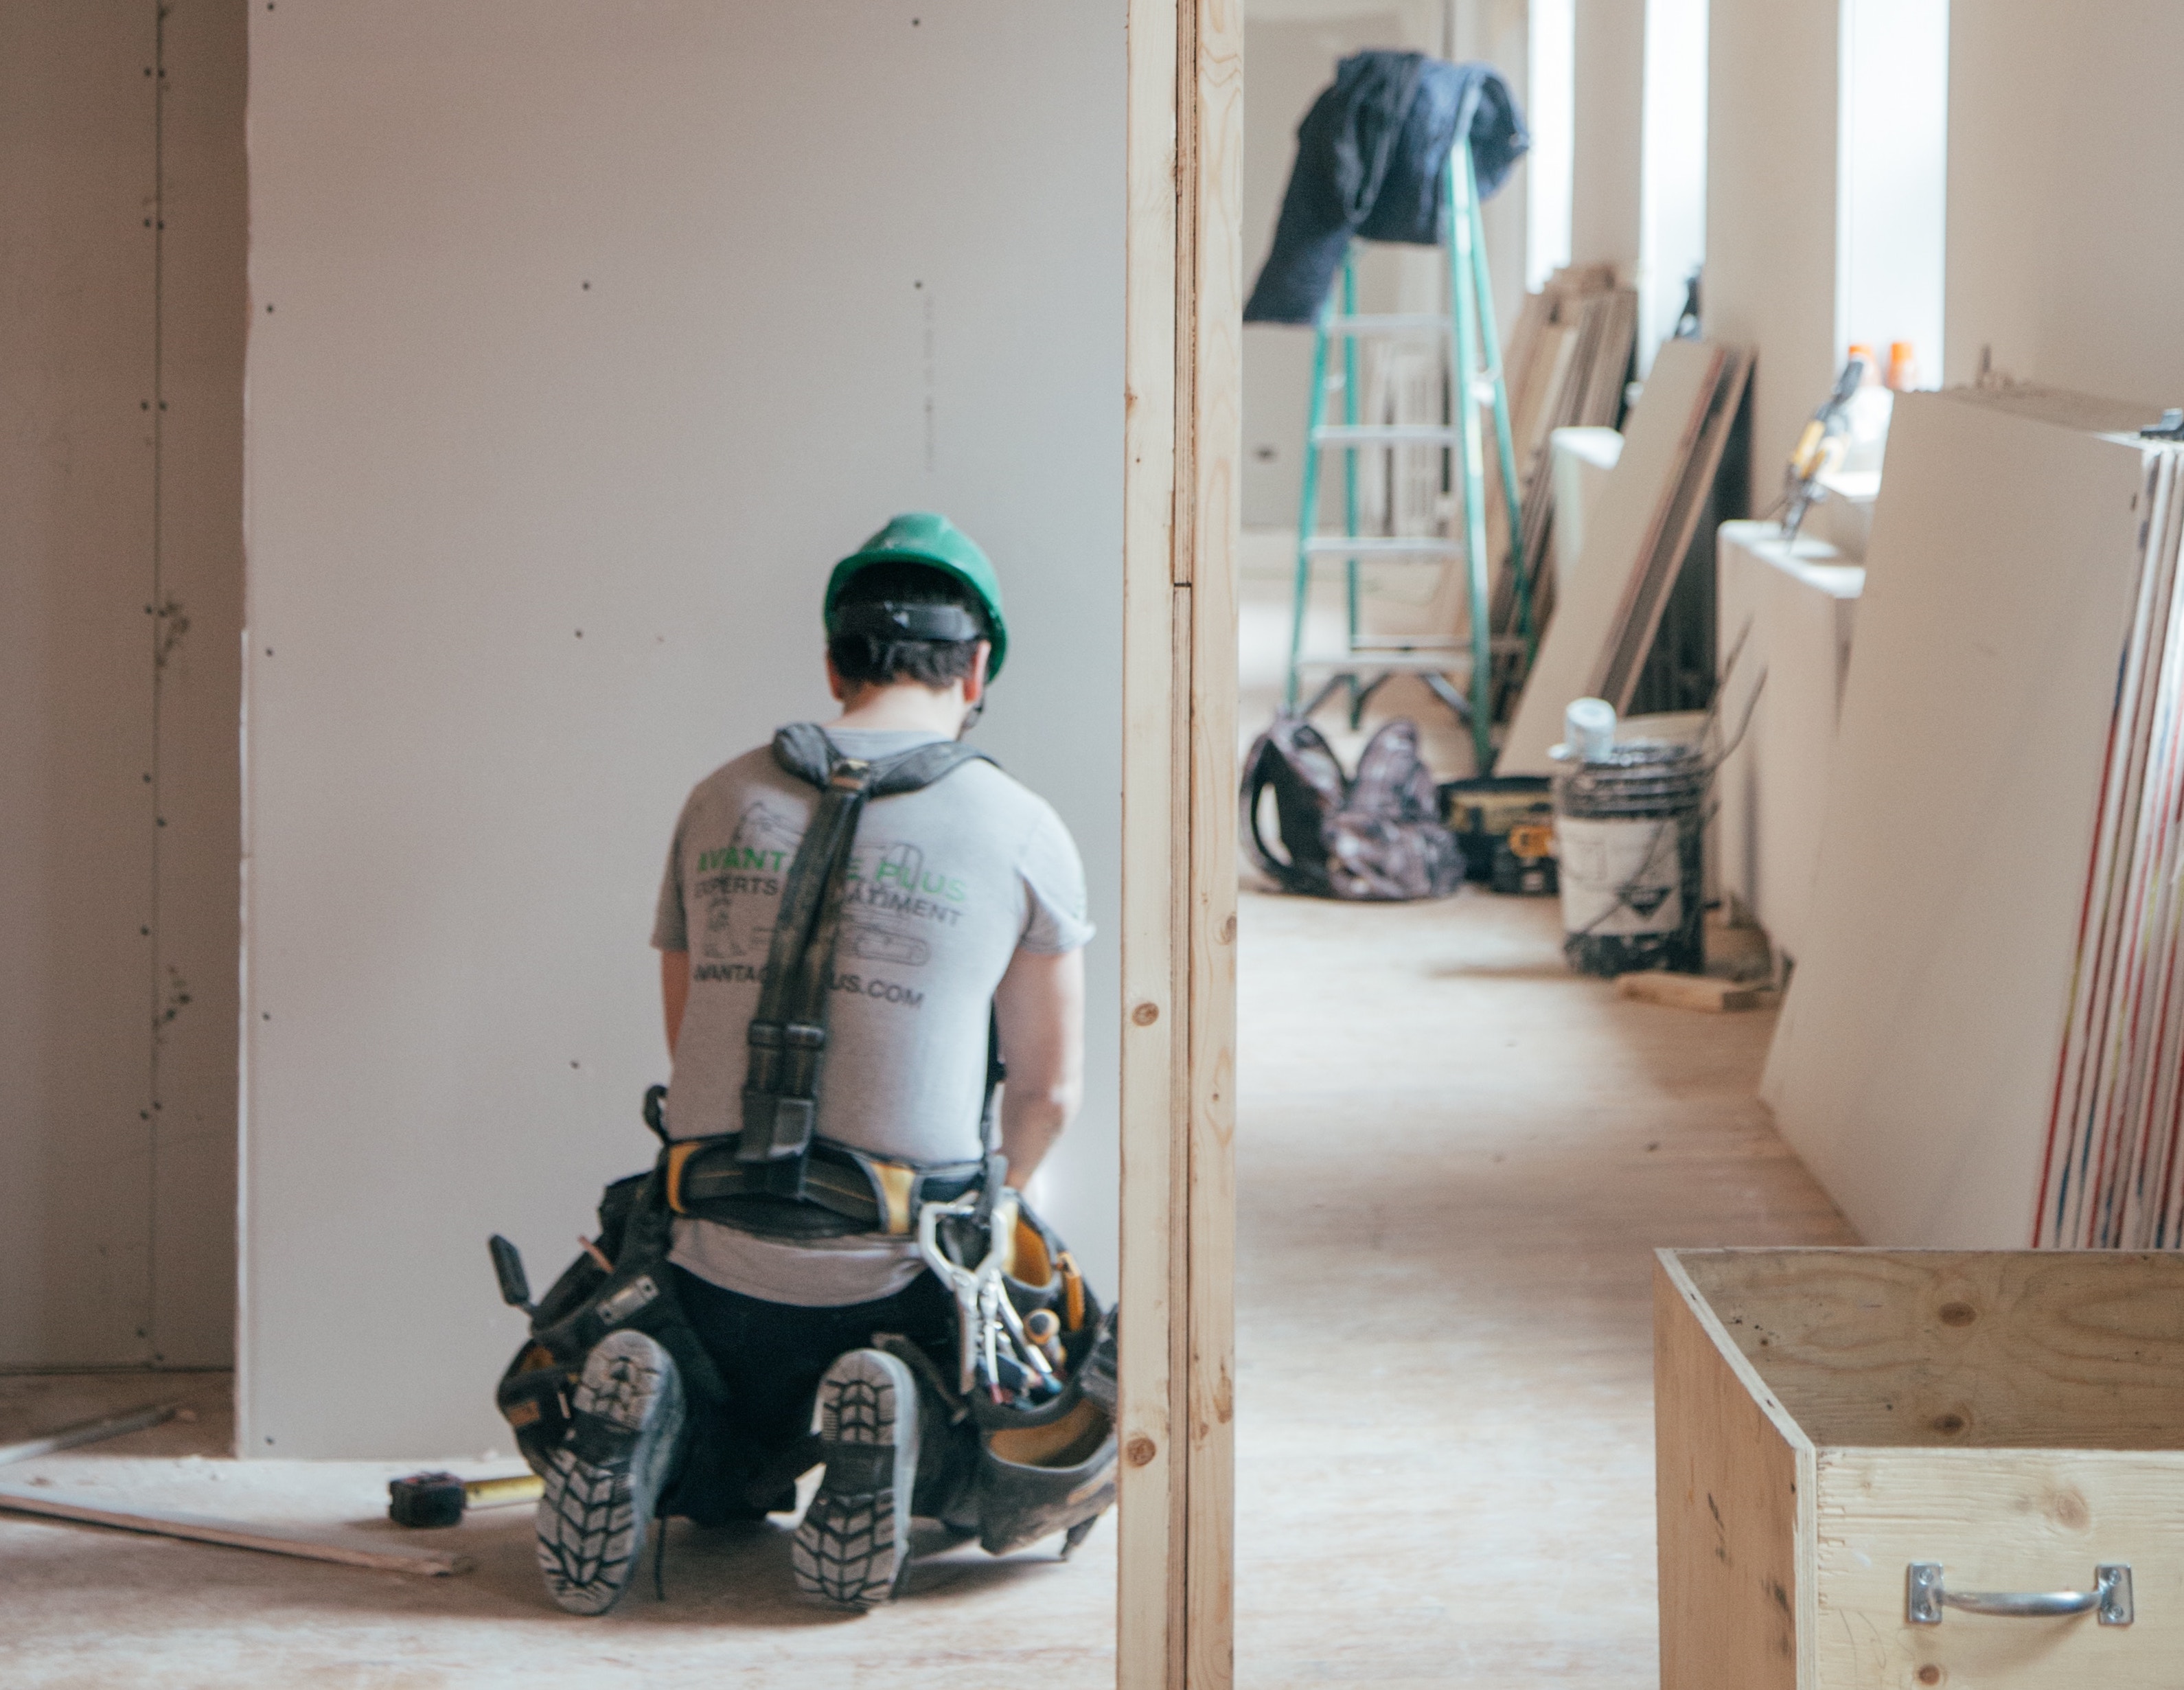 Construction worker at work on home interior installing drywall